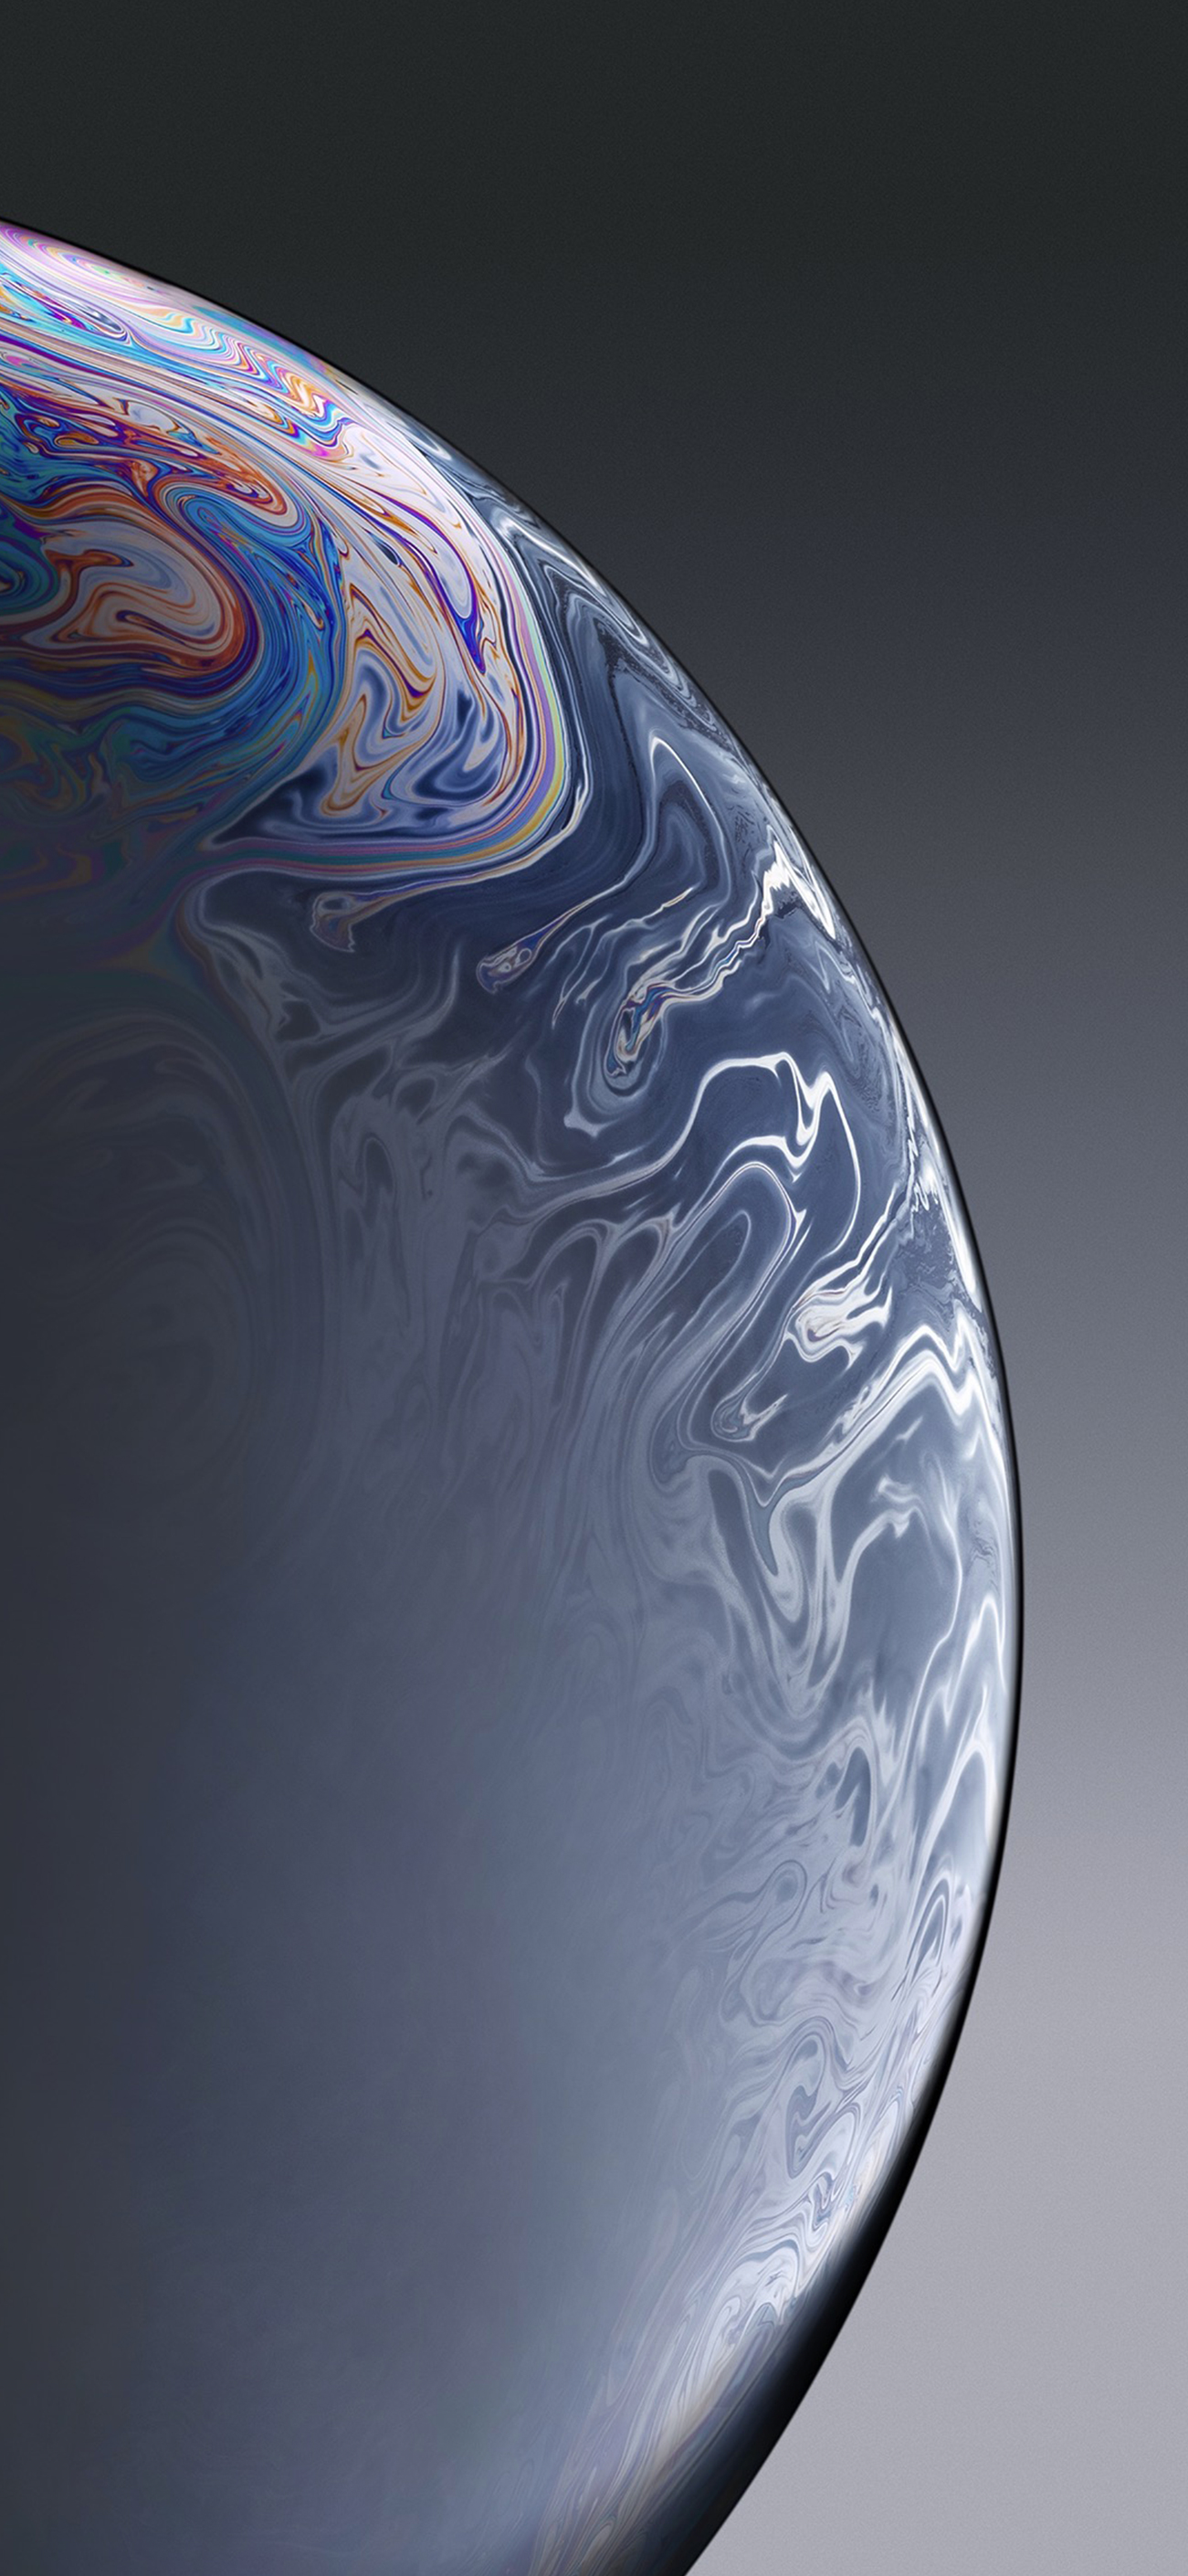 iPhone XR Wallpaper - Single Bubble - Space Grey - Wallpapers Central